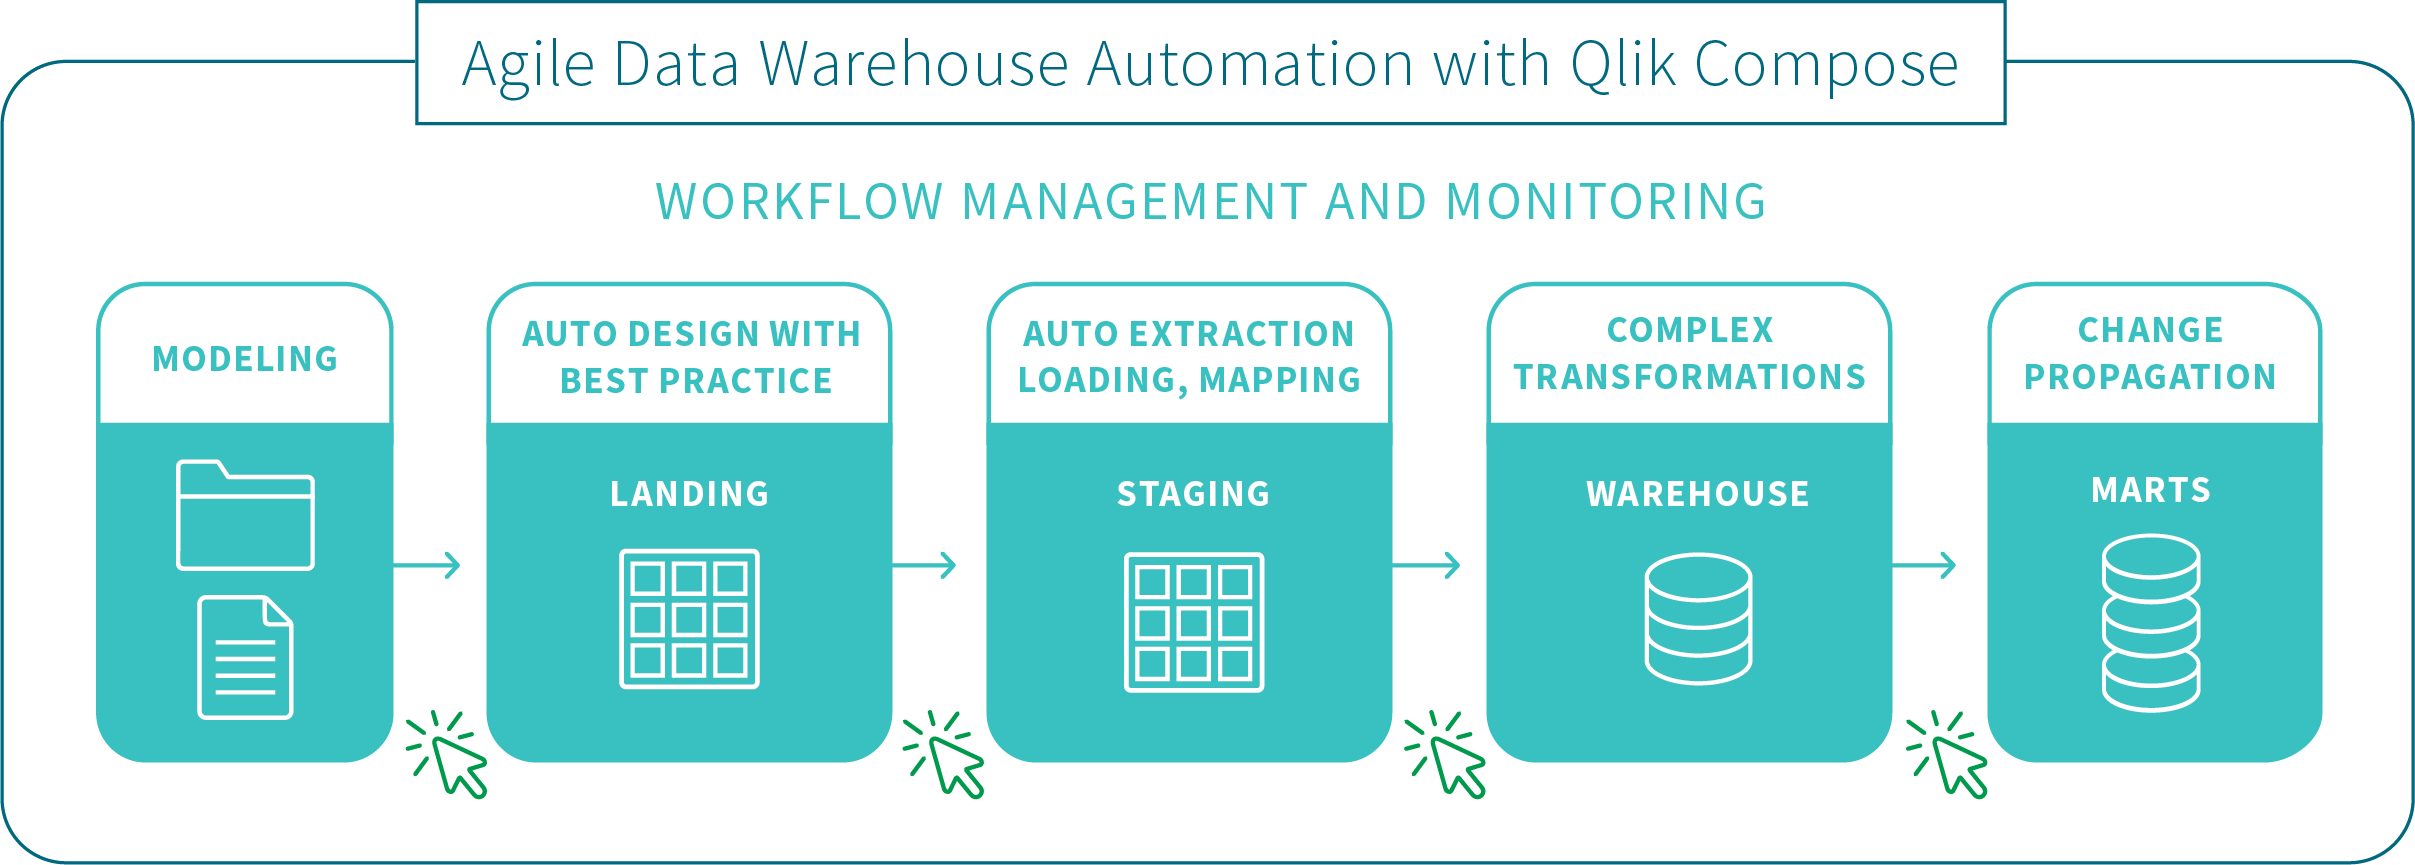 Qlik Compose For Data Warehouses example architecture model, with source databases loaded into a Data Warehouse's Landing Zone by Qlik Replicate, generated into a Data Model by Qlik Compose, and then processed into a Staging Area, Data Warehouse, and Data Marts.